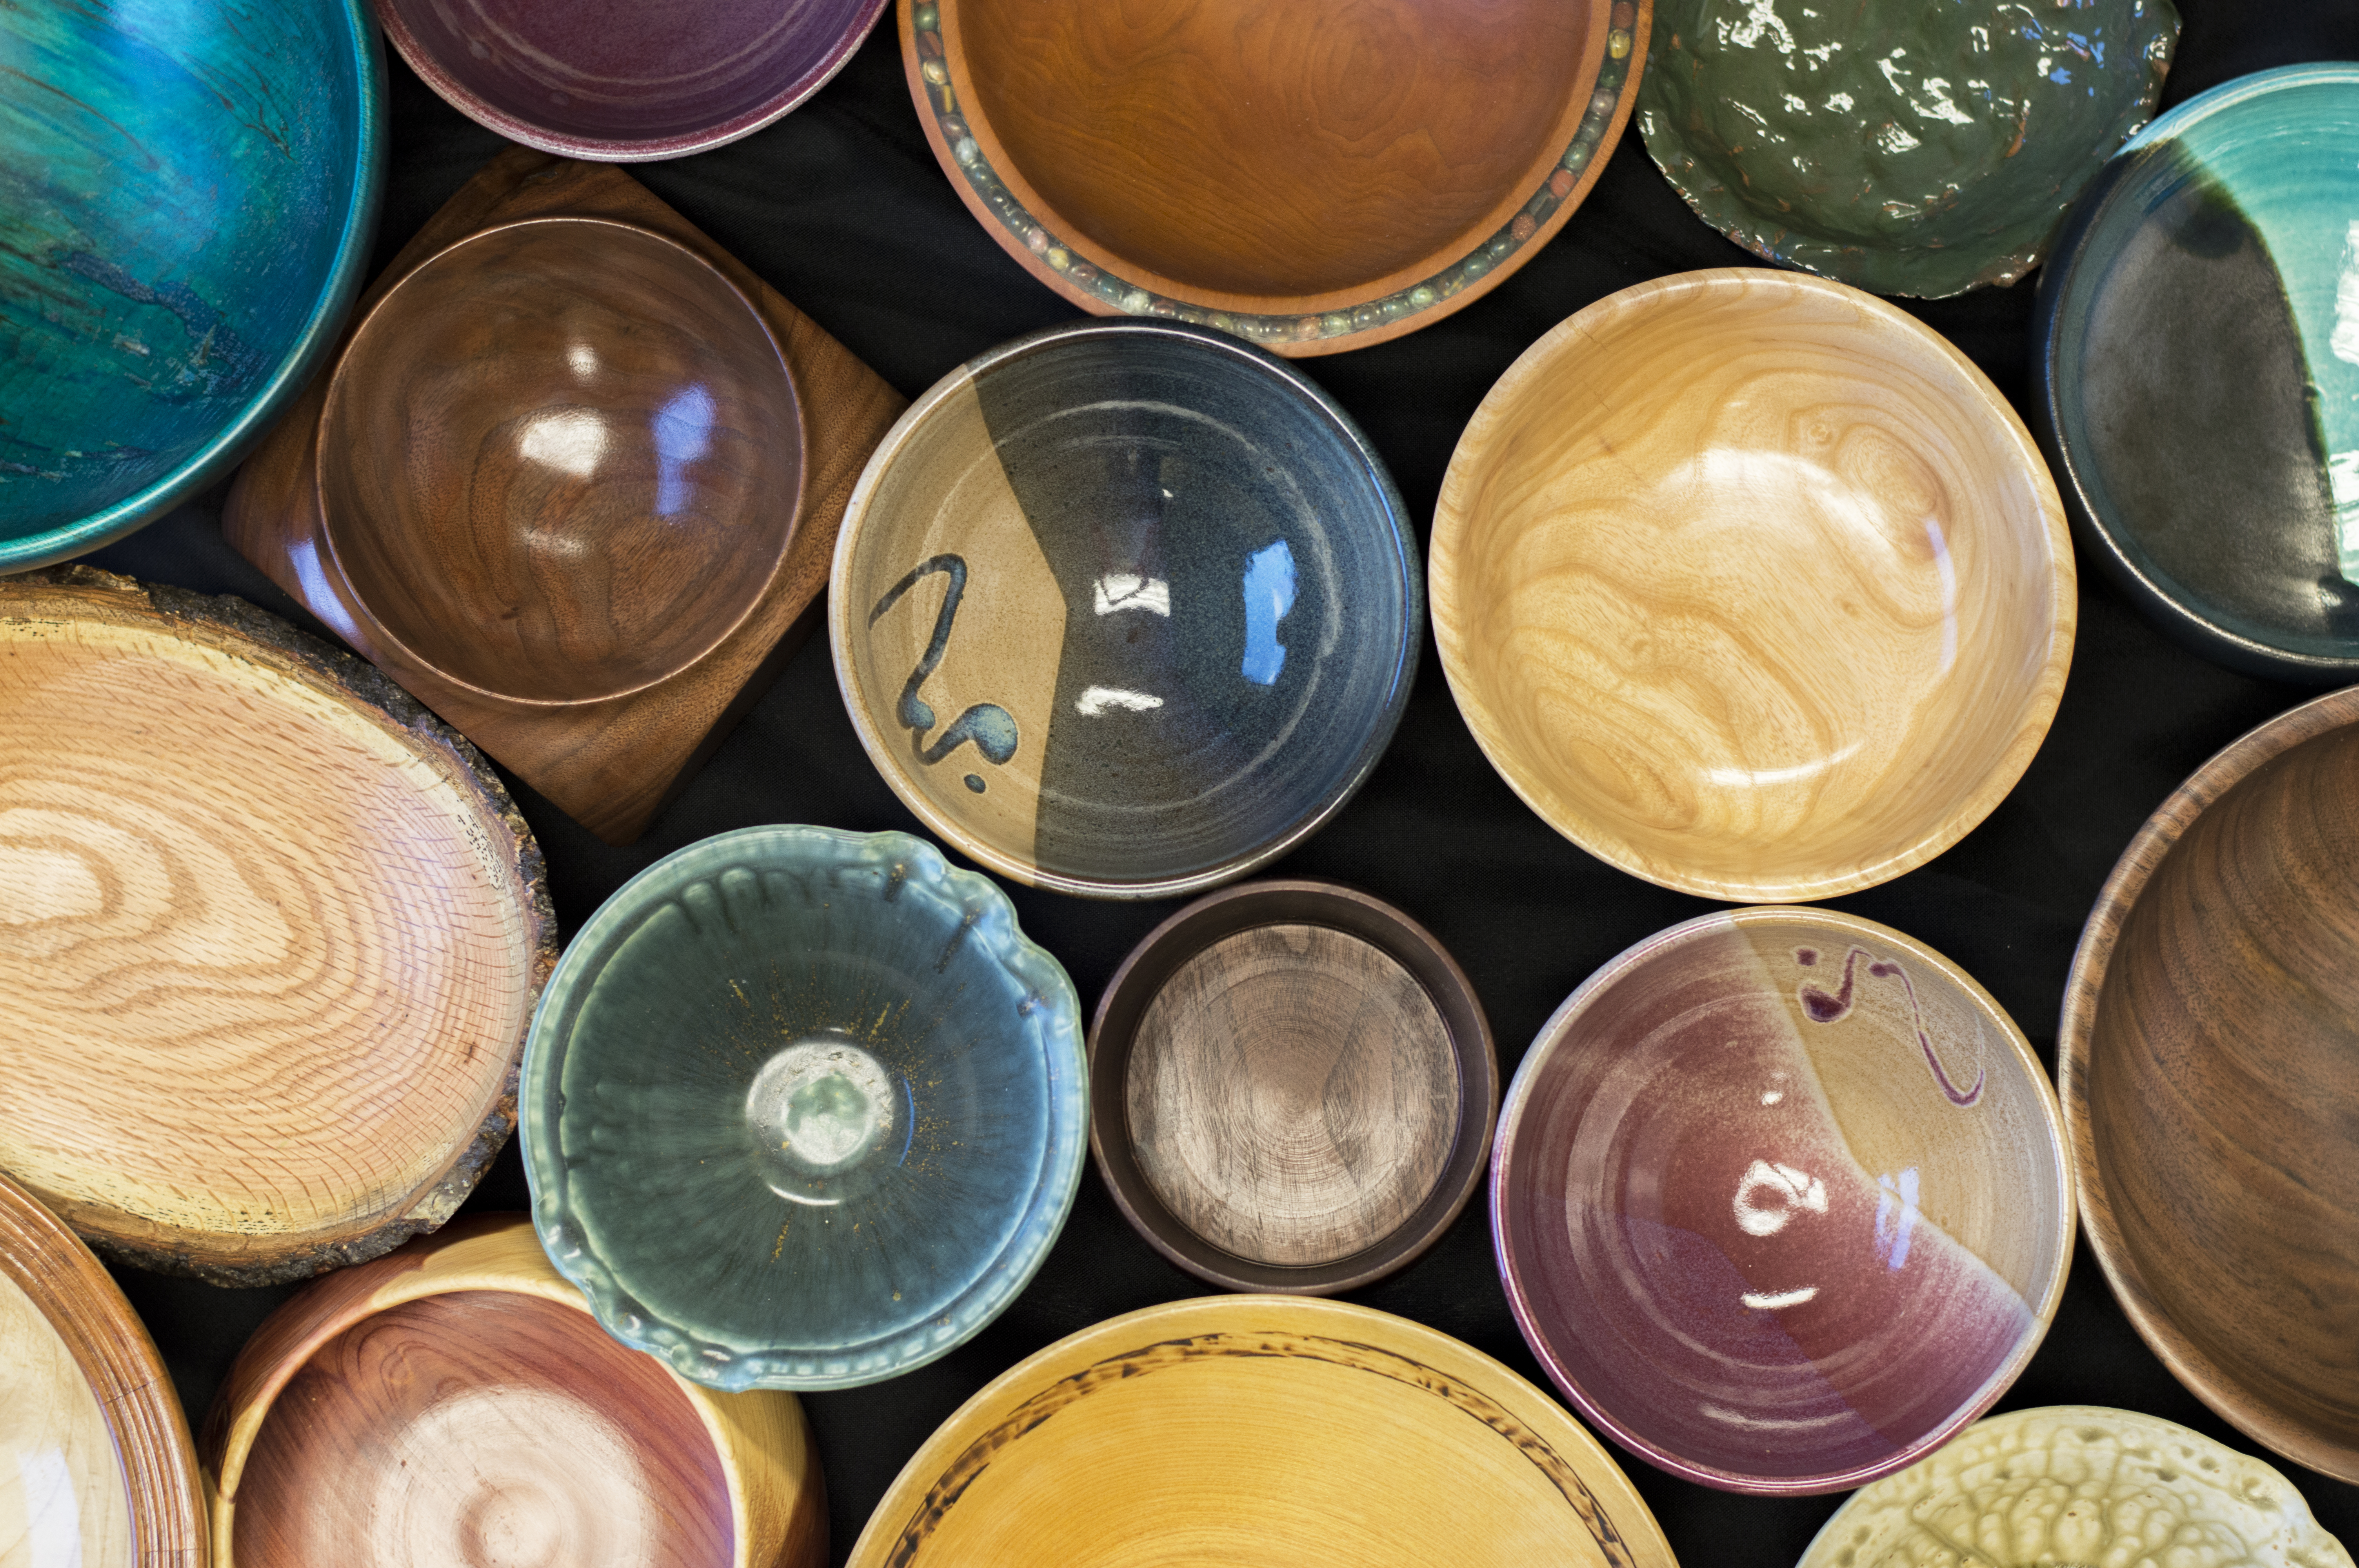 Second annual Empty Bowls aims to raise funds, awareness to fight hunger